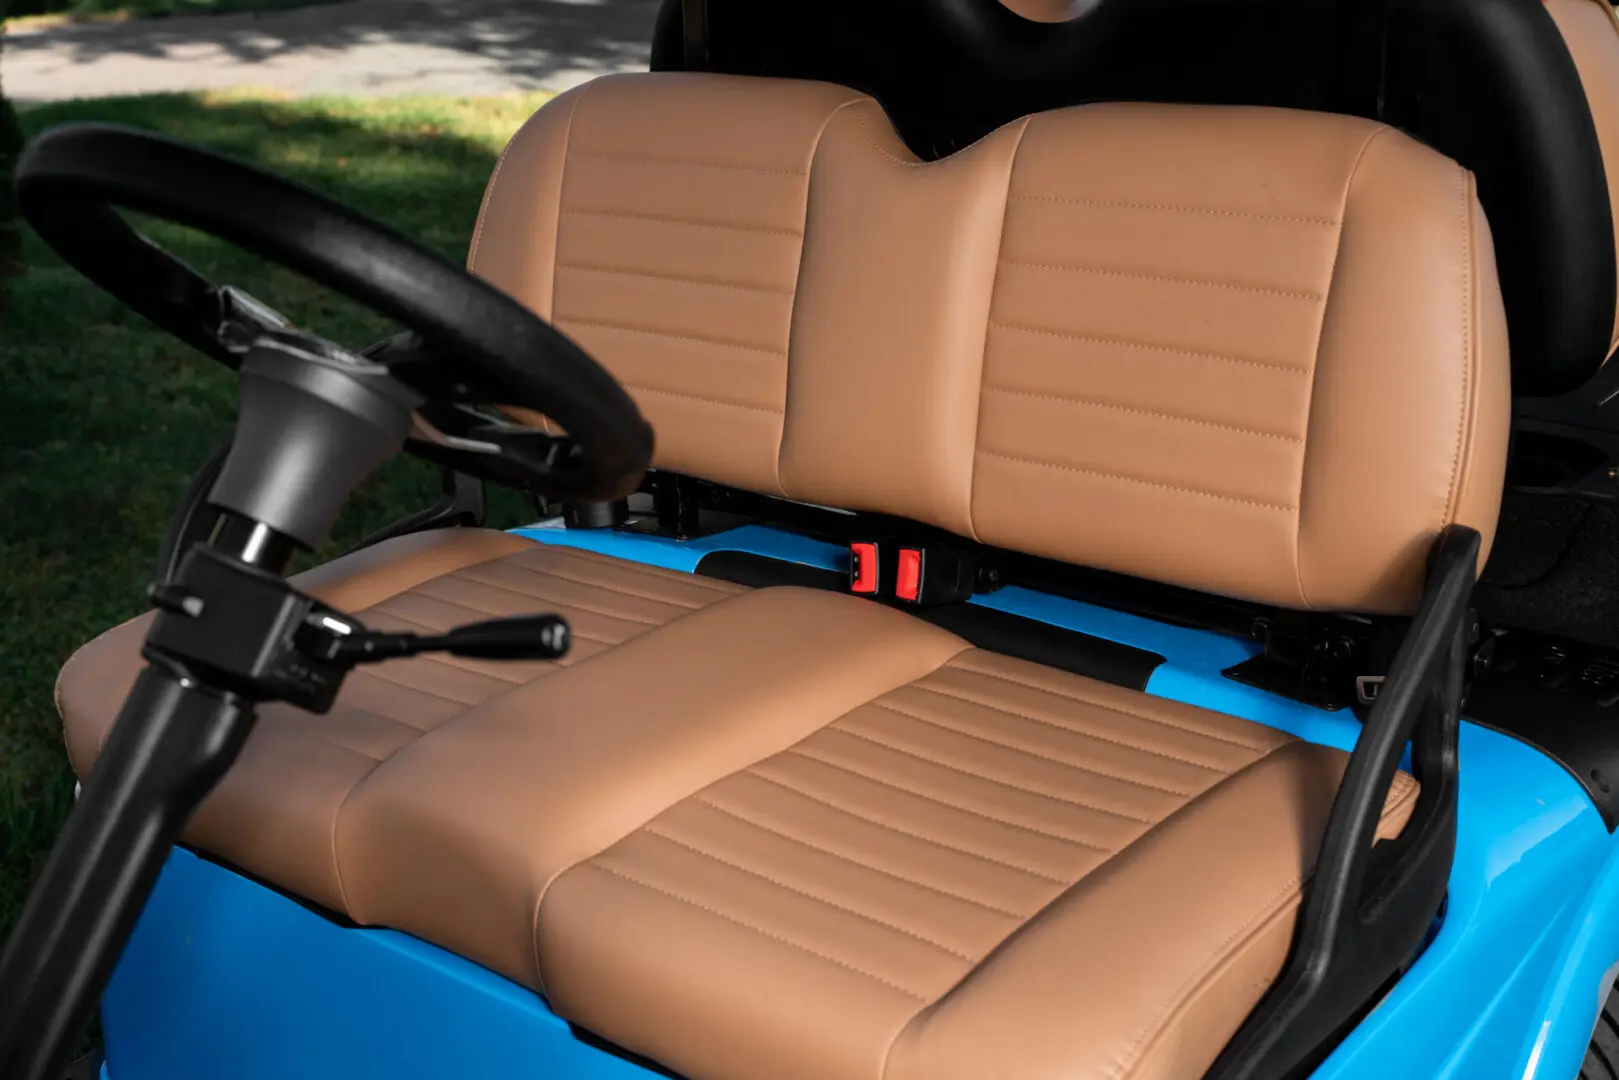 A close up of the seats in an electric vehicle